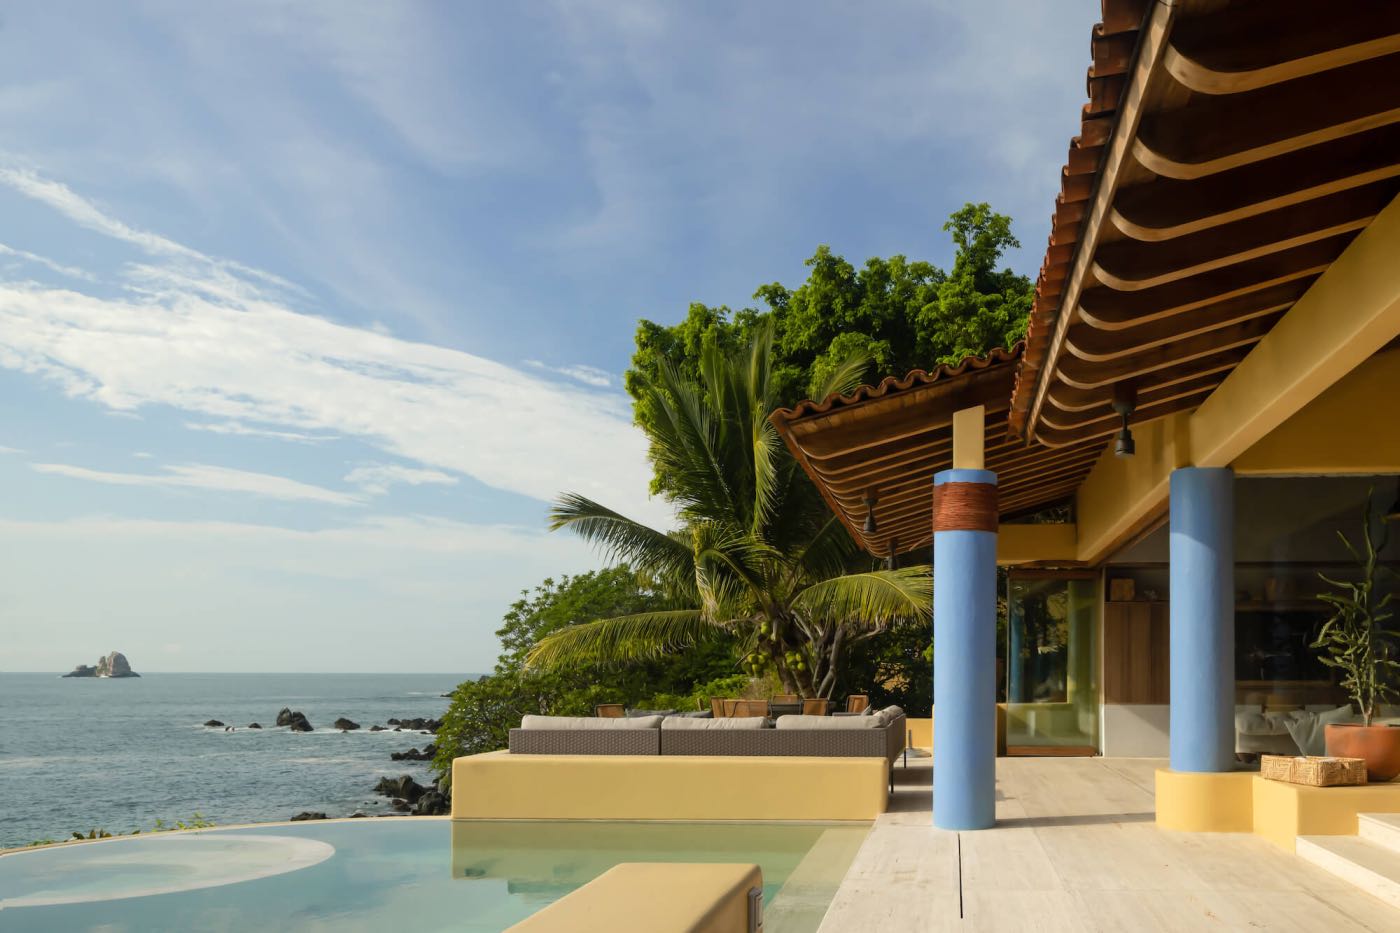 Punta Ixtapa House in Mexico designed by|Houses